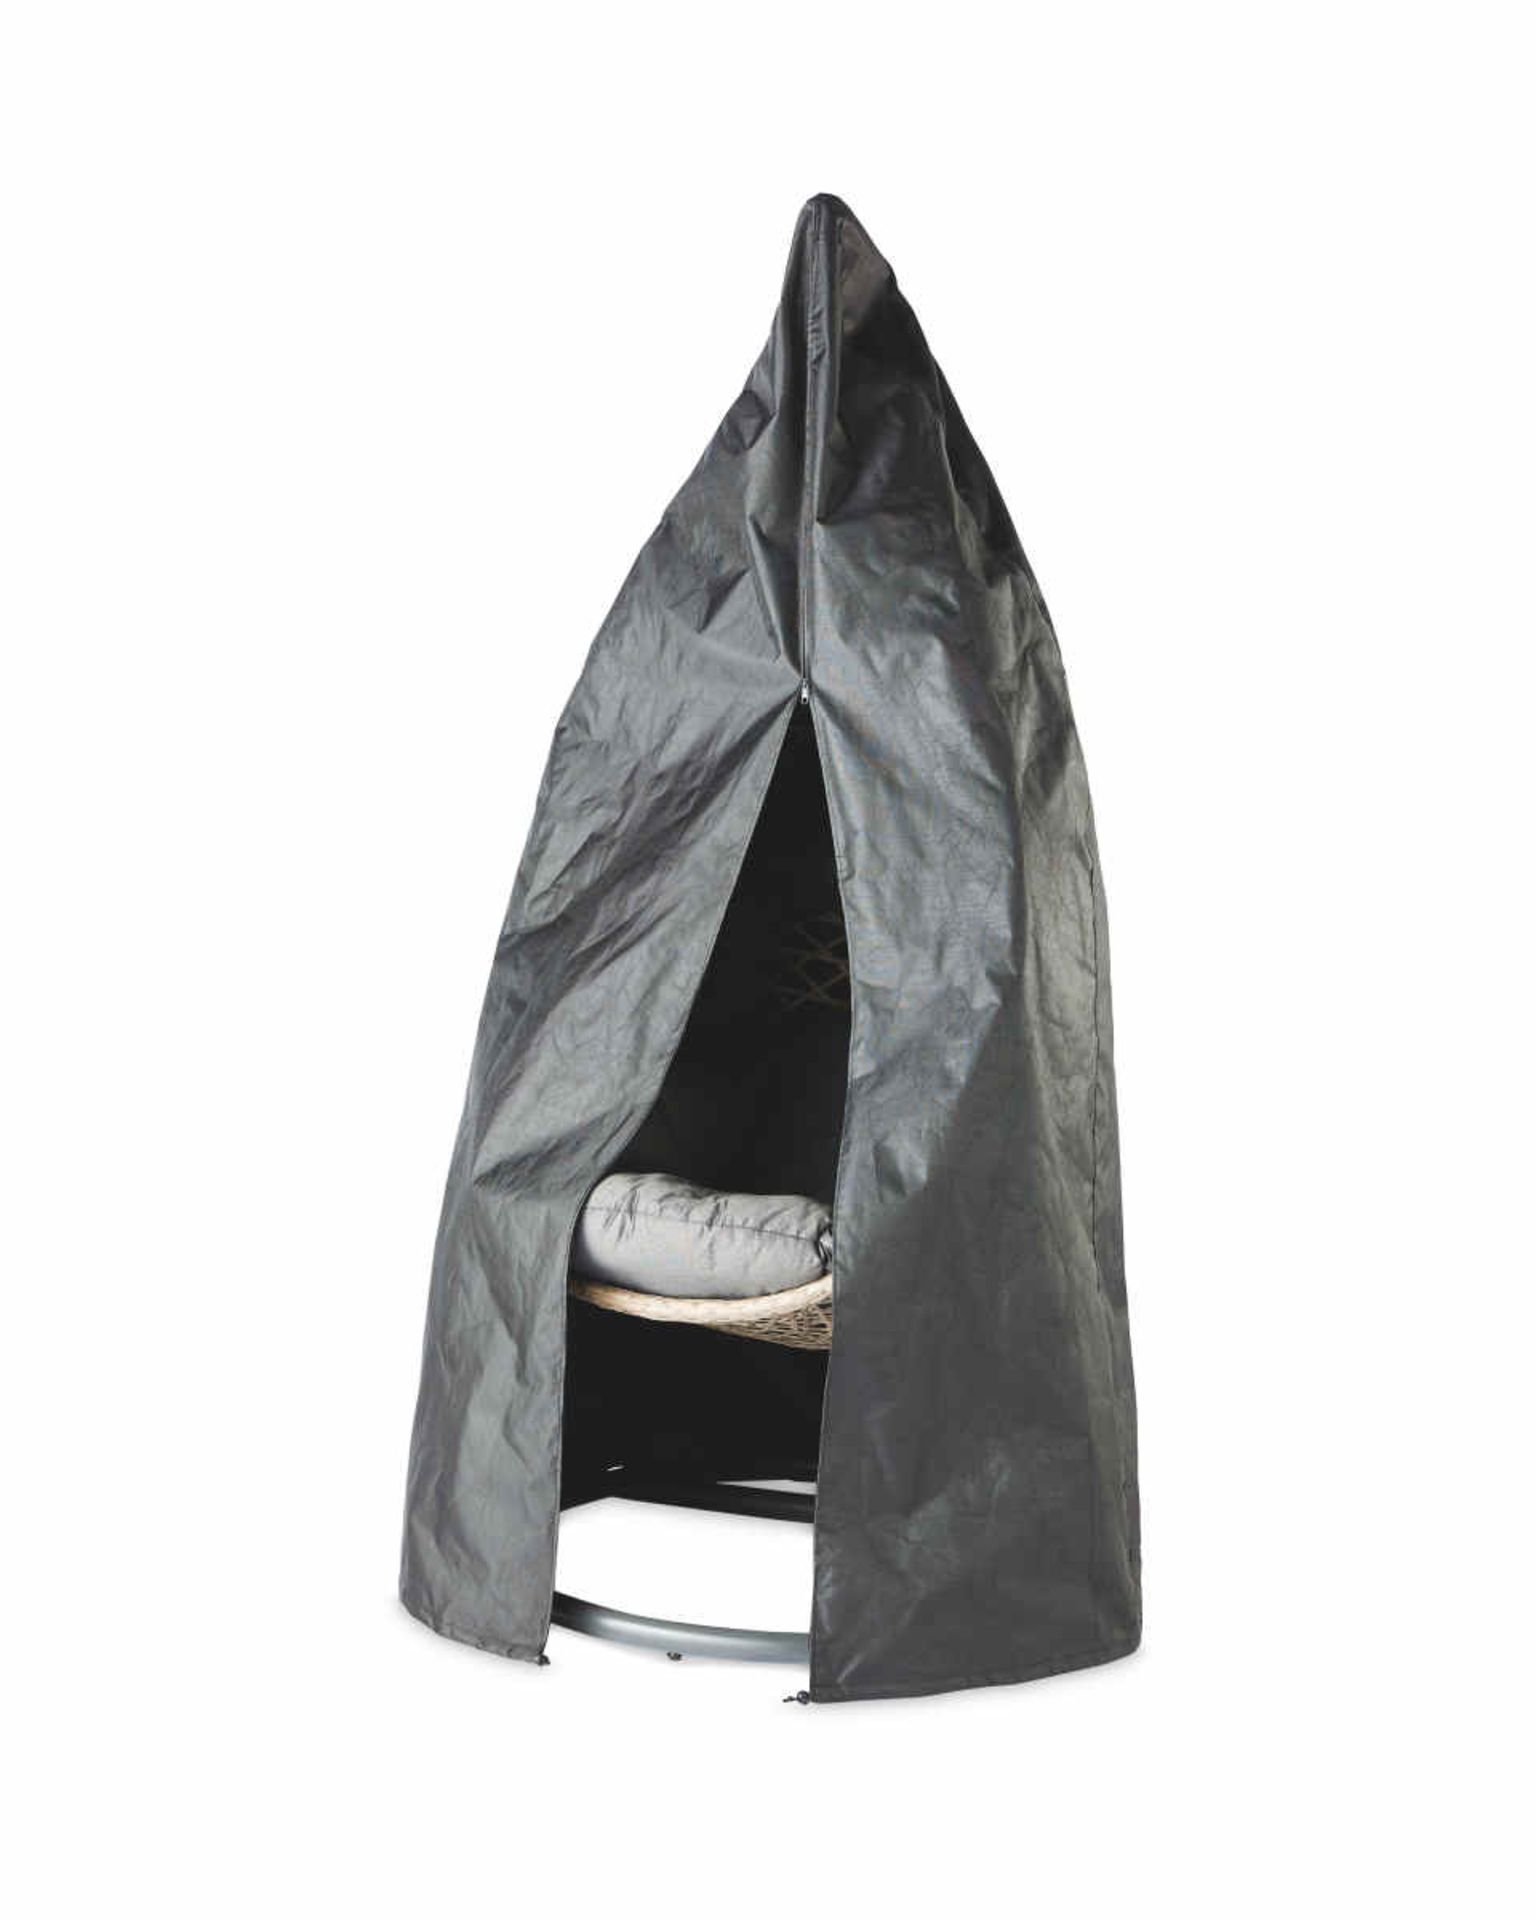 Luxury Hanging Egg Chair. The Hanging Egg Chair is the ideal way to relax in stylish comfort. - Image 2 of 3